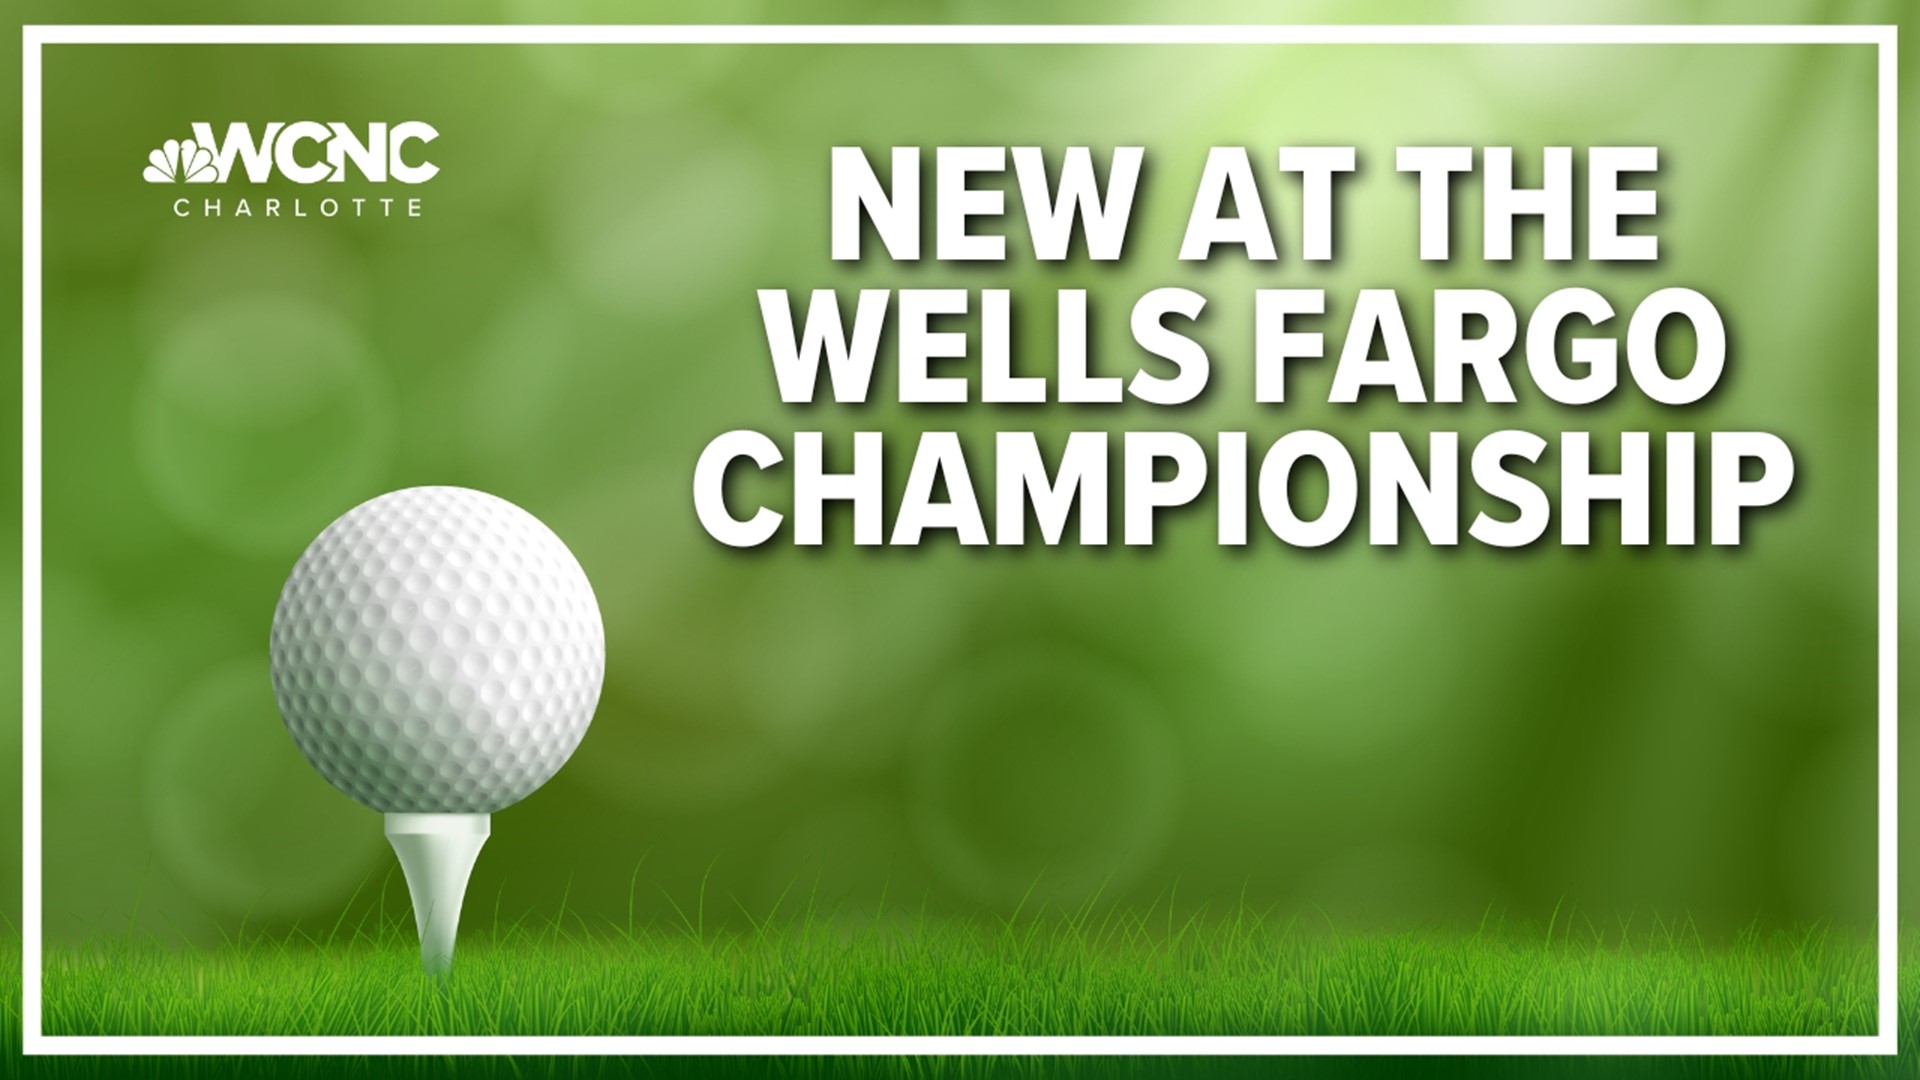 The Wells Fargo Championship at Quail Hollow will be "bigger and better" than ever before.